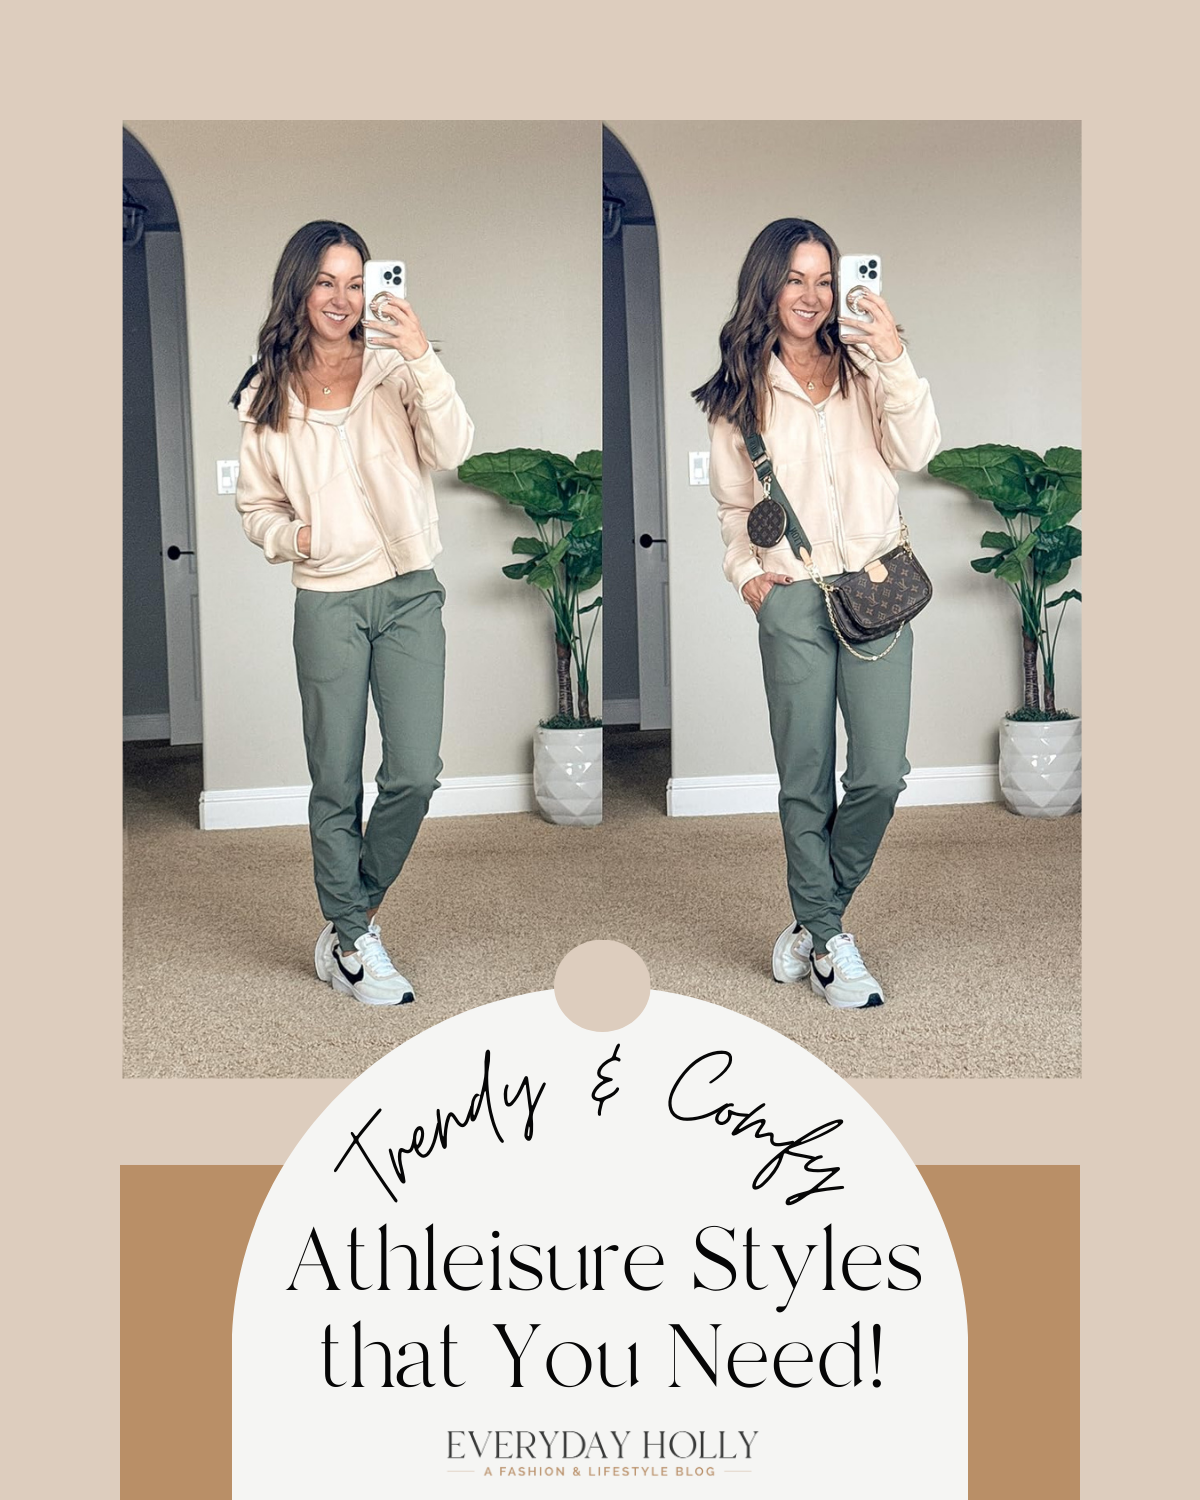 trendy and comfy athleisure styles that you need | #trendy #comfy #athleisure #athletic #joggers #sweatshirts #sneakers #casual #neutral #purse #seamless #pockets #running #exercise